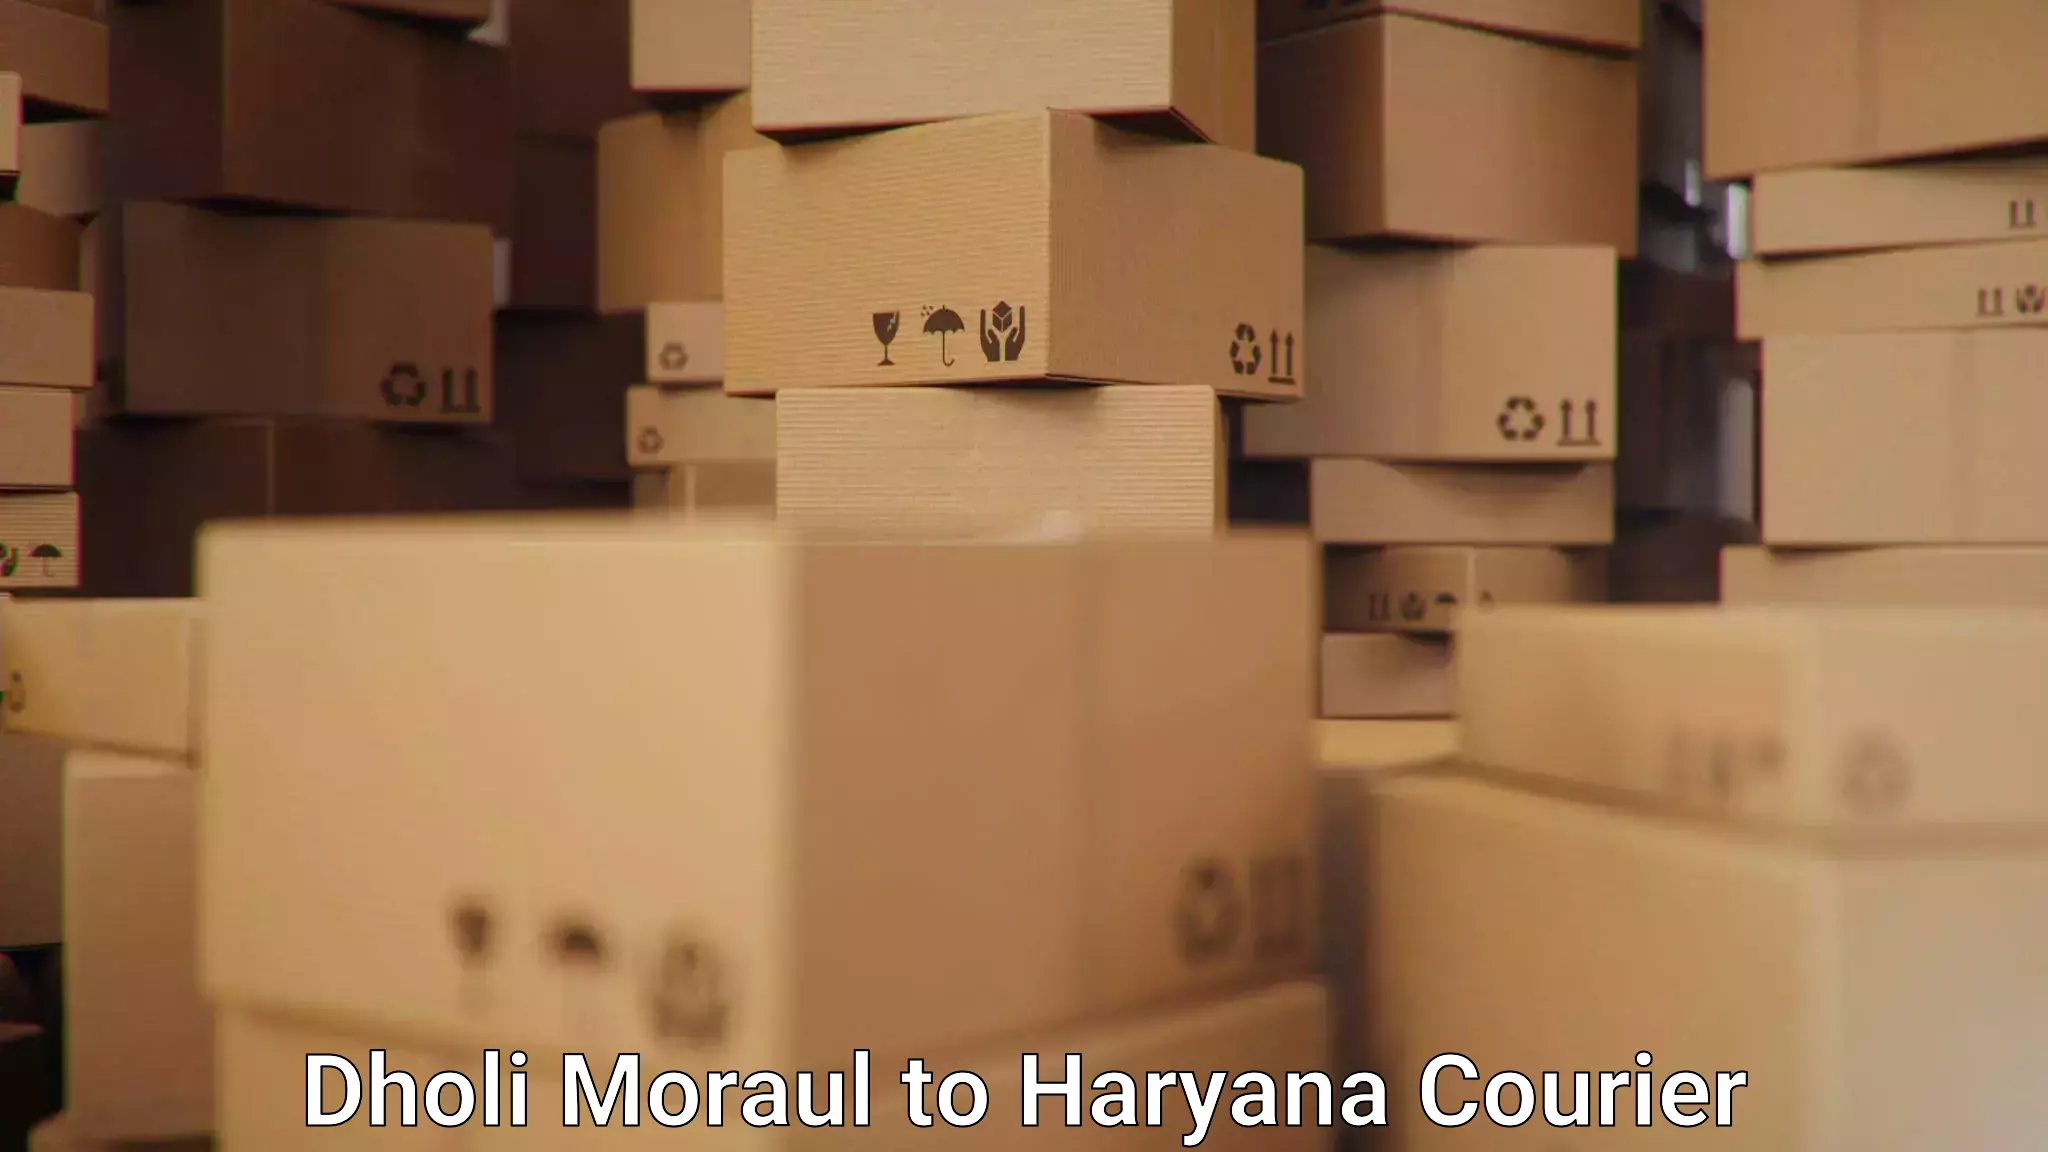 Efficient parcel delivery Dholi Moraul to Chaudhary Charan Singh Haryana Agricultural University Hisar